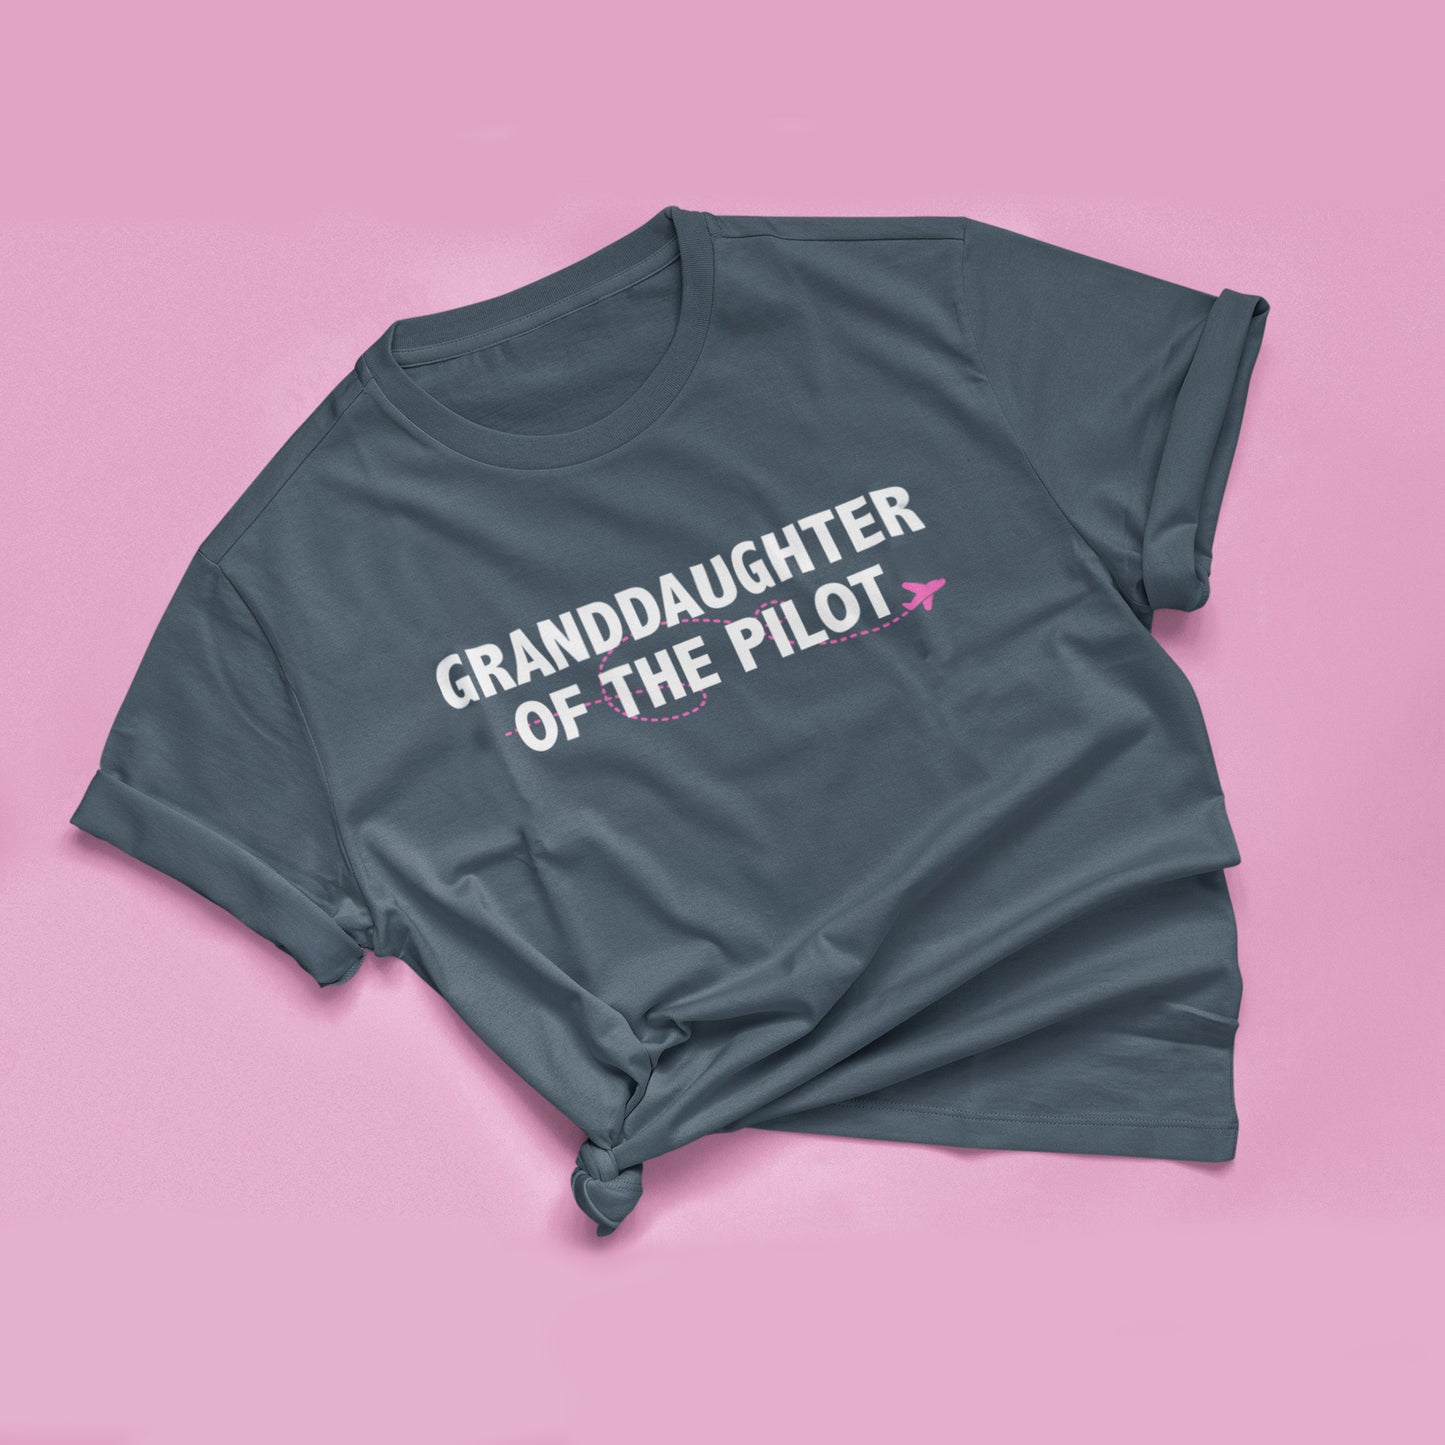 Granddaughter of the/a Pilot - Youth T-shirt